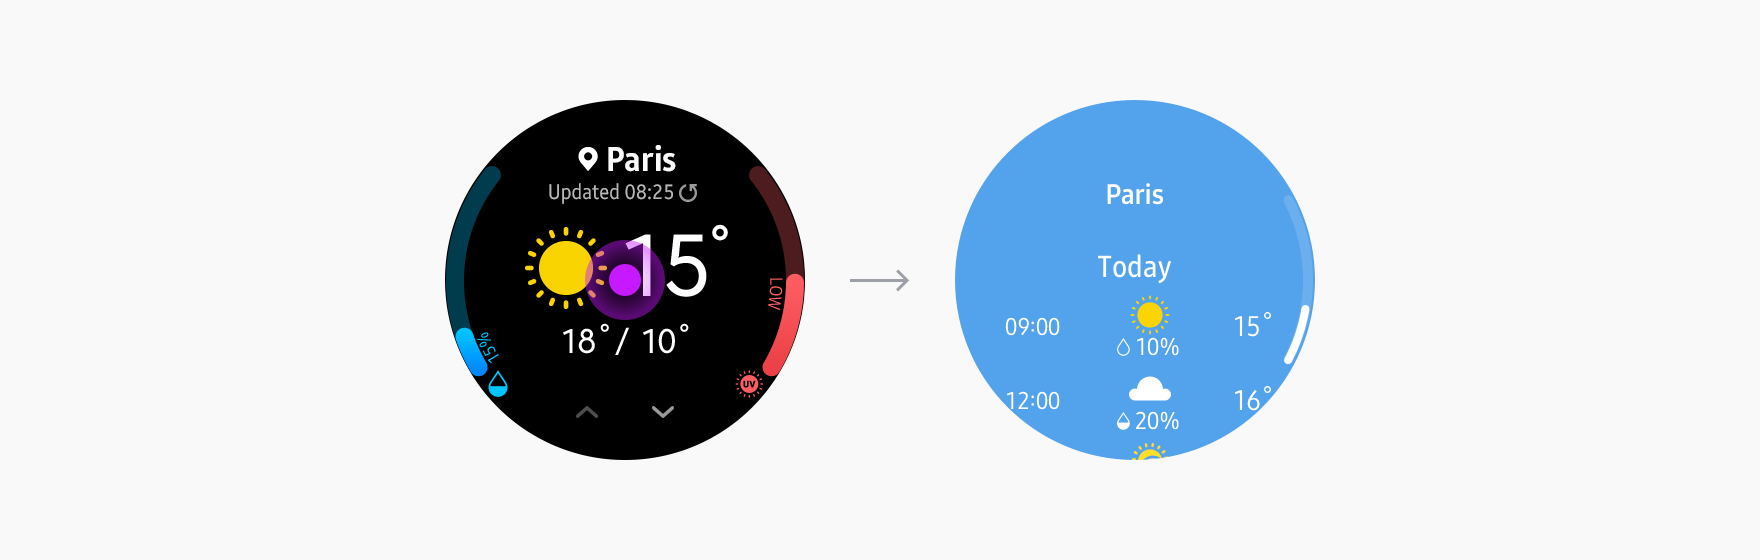 Weather widgets can show the weather for a chosen city and provide a direct route to more detailed info within the app.